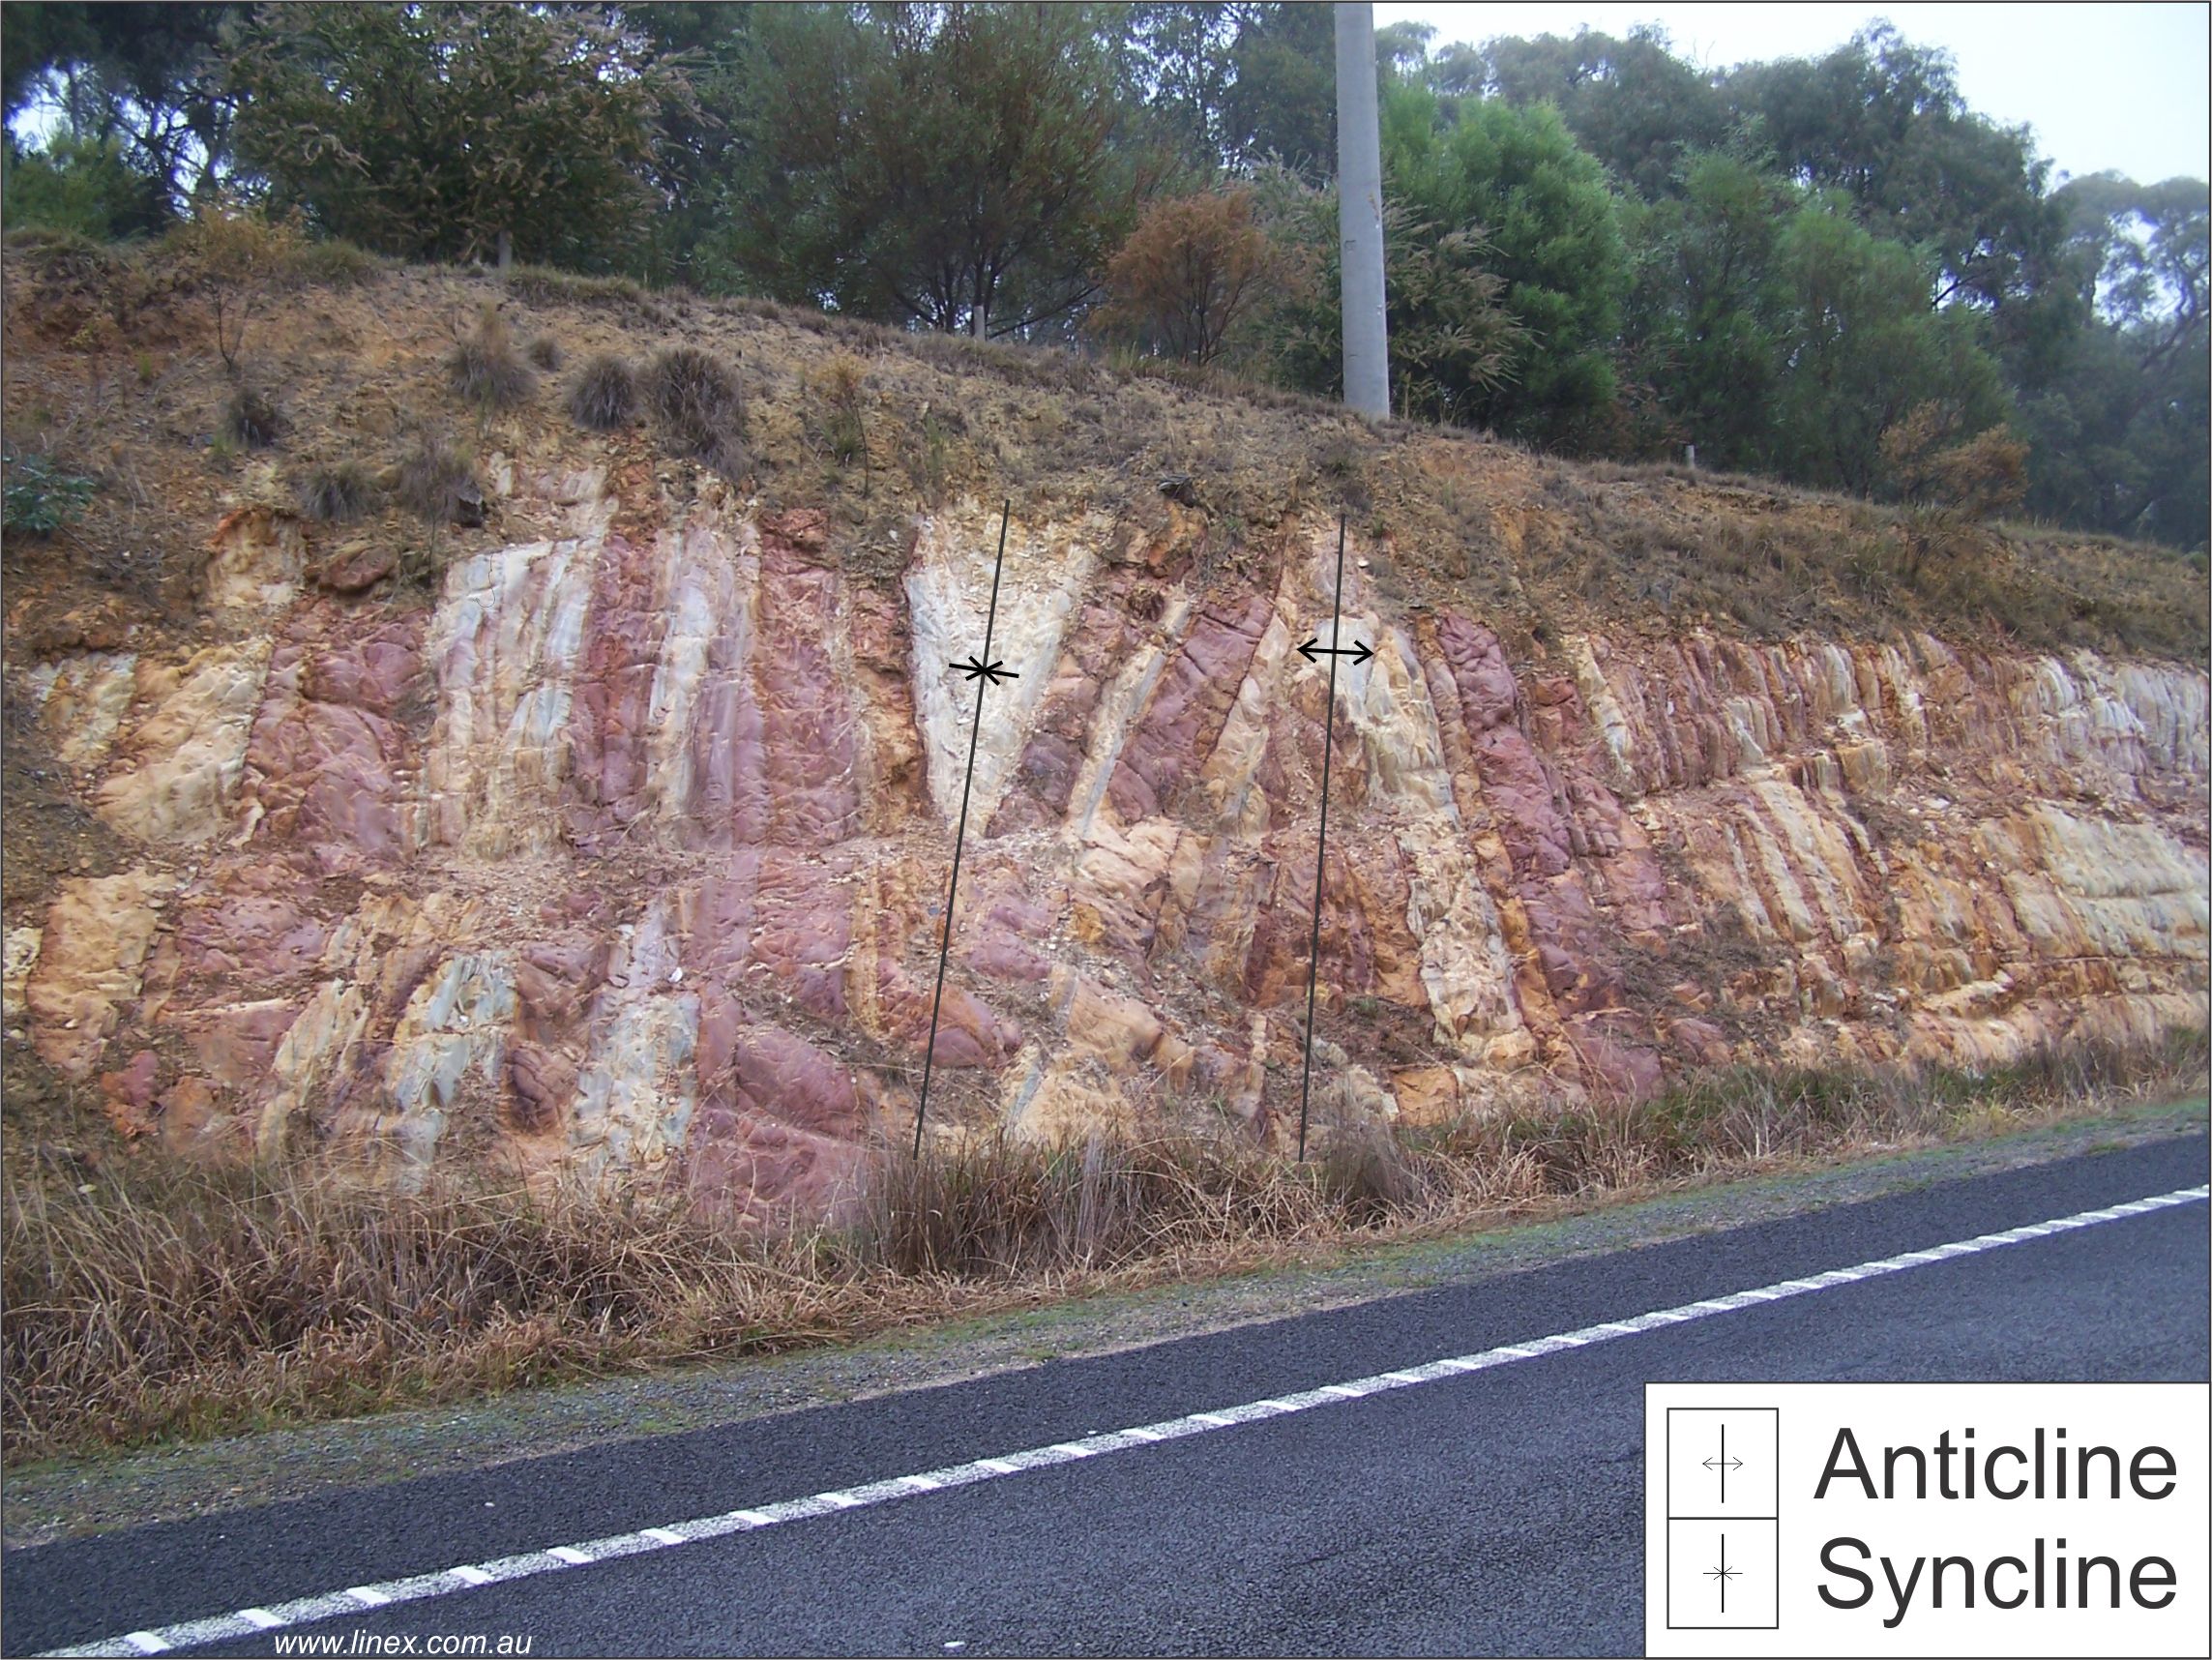 Blampied - Anticline and syncline